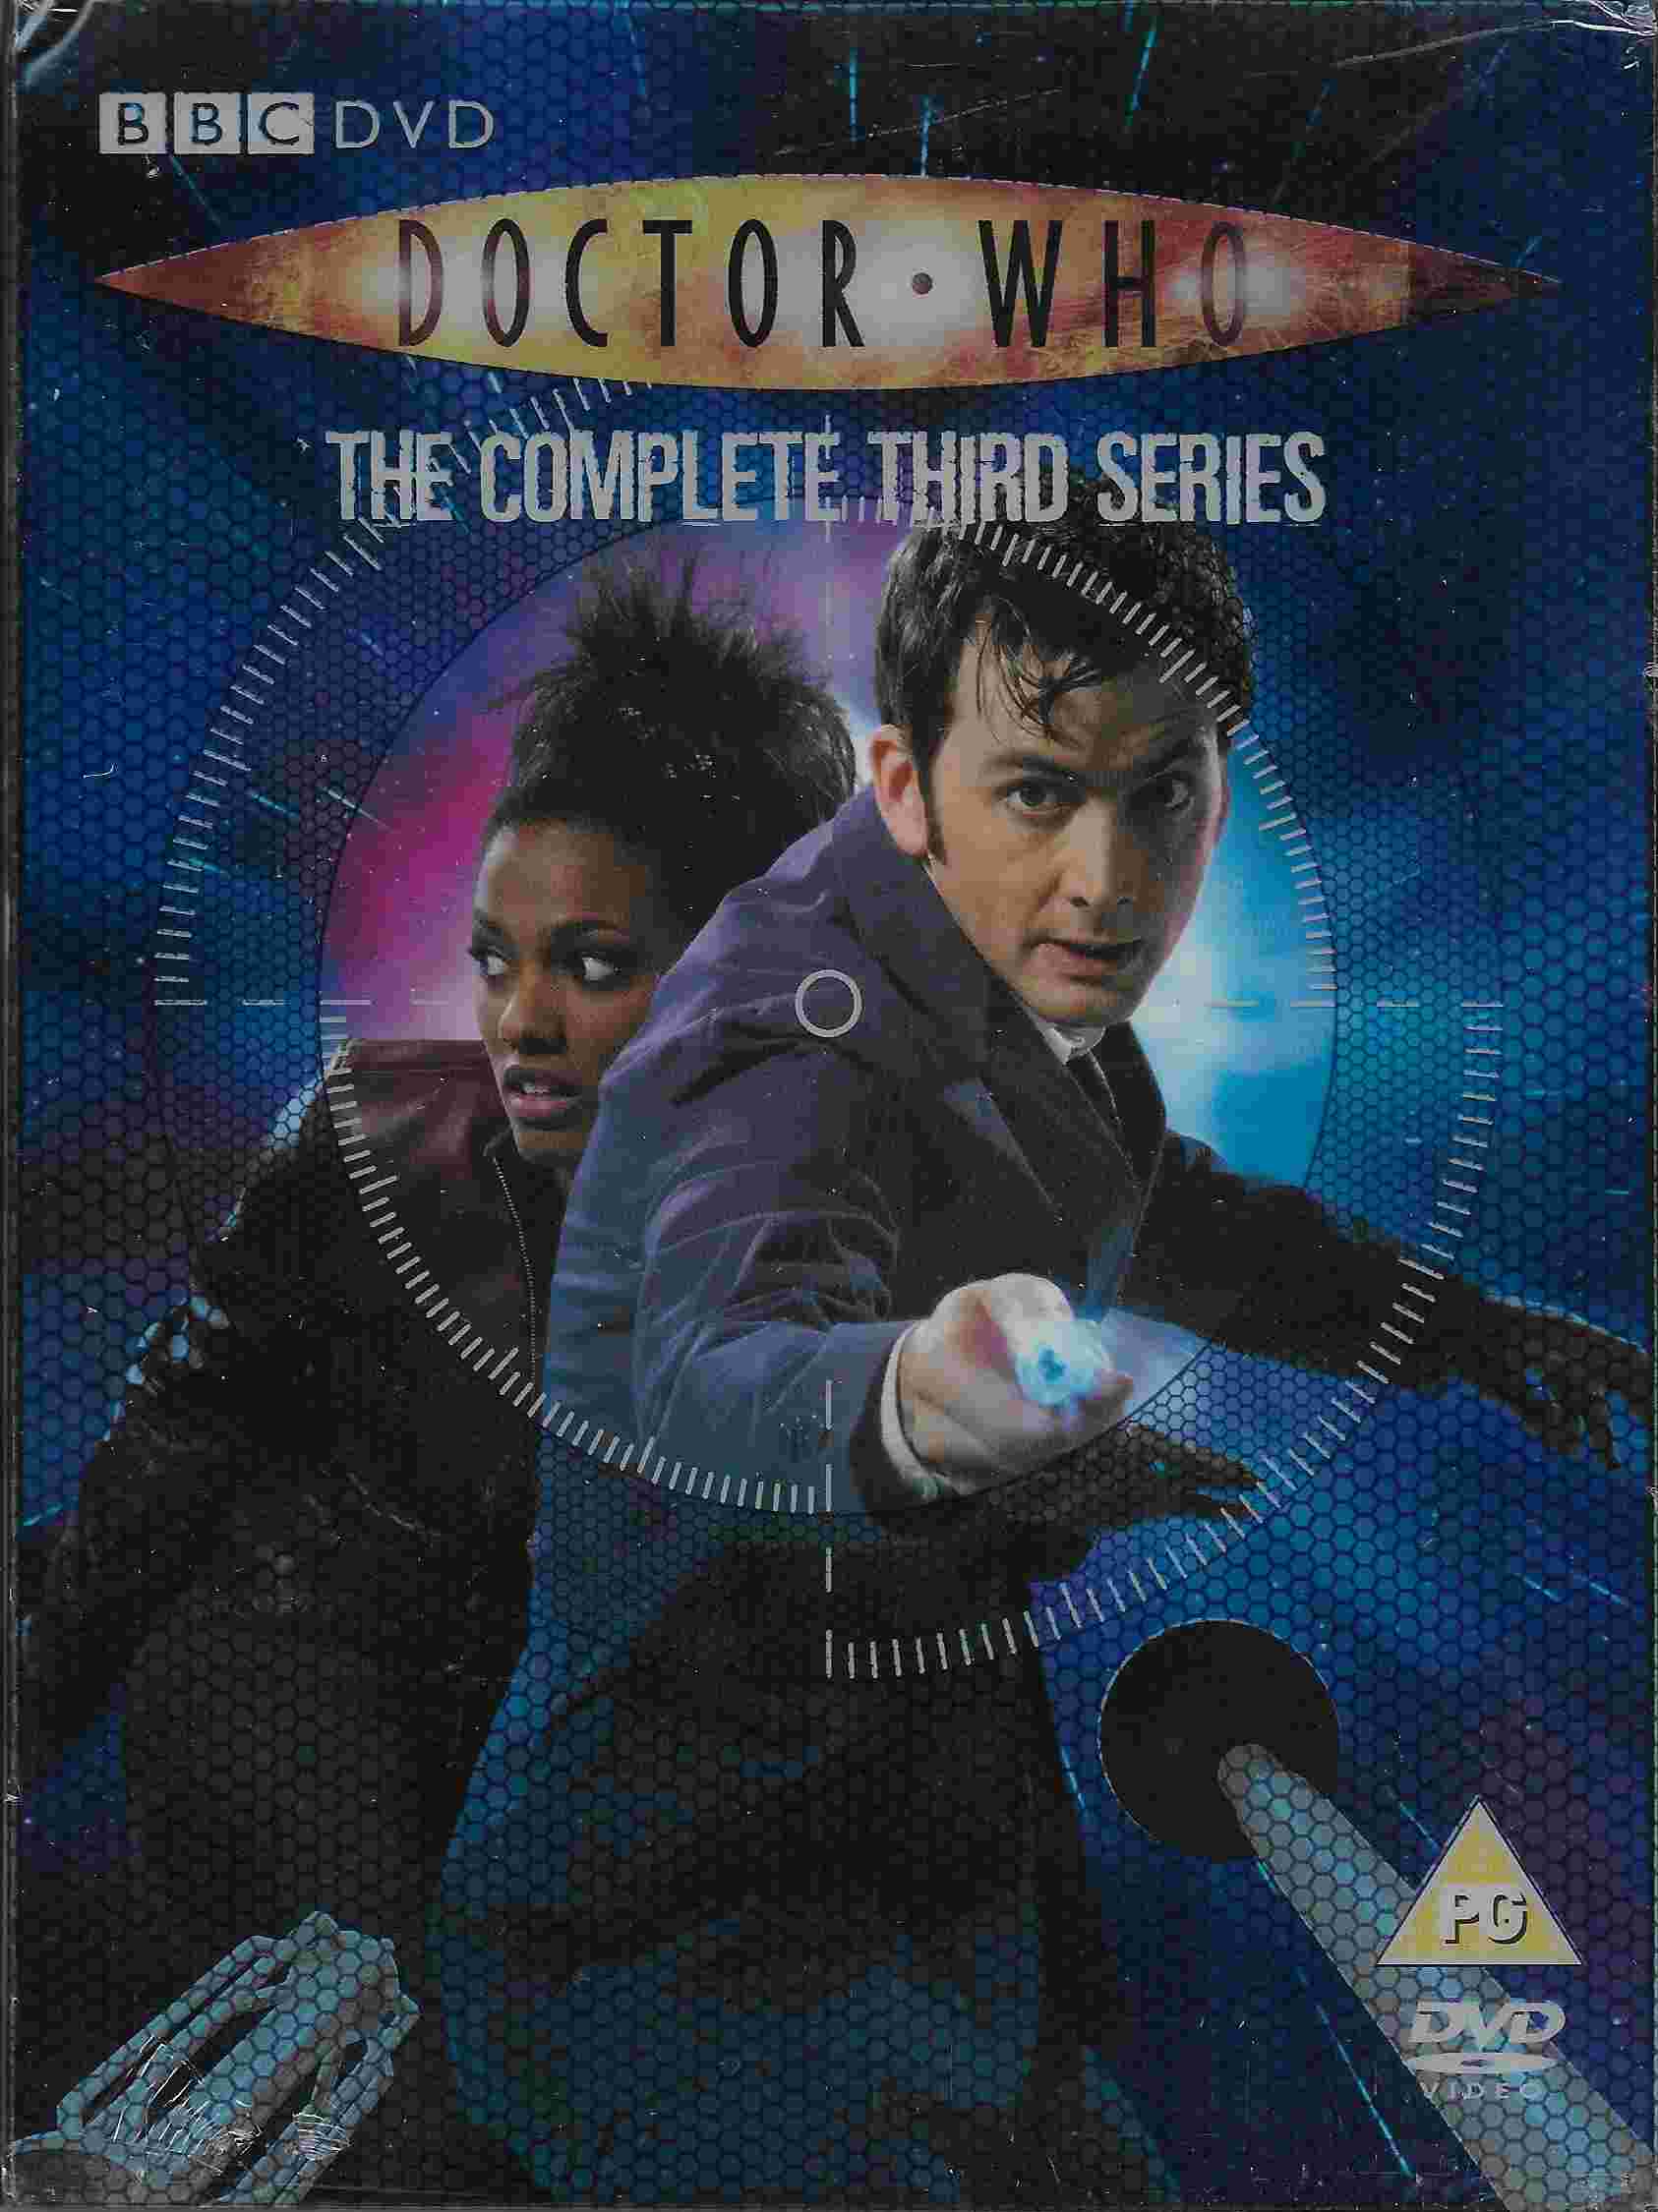 Picture of BBCDVD 2579 Doctor Who - Series 3 by artist Various from the BBC dvds - Records and Tapes library